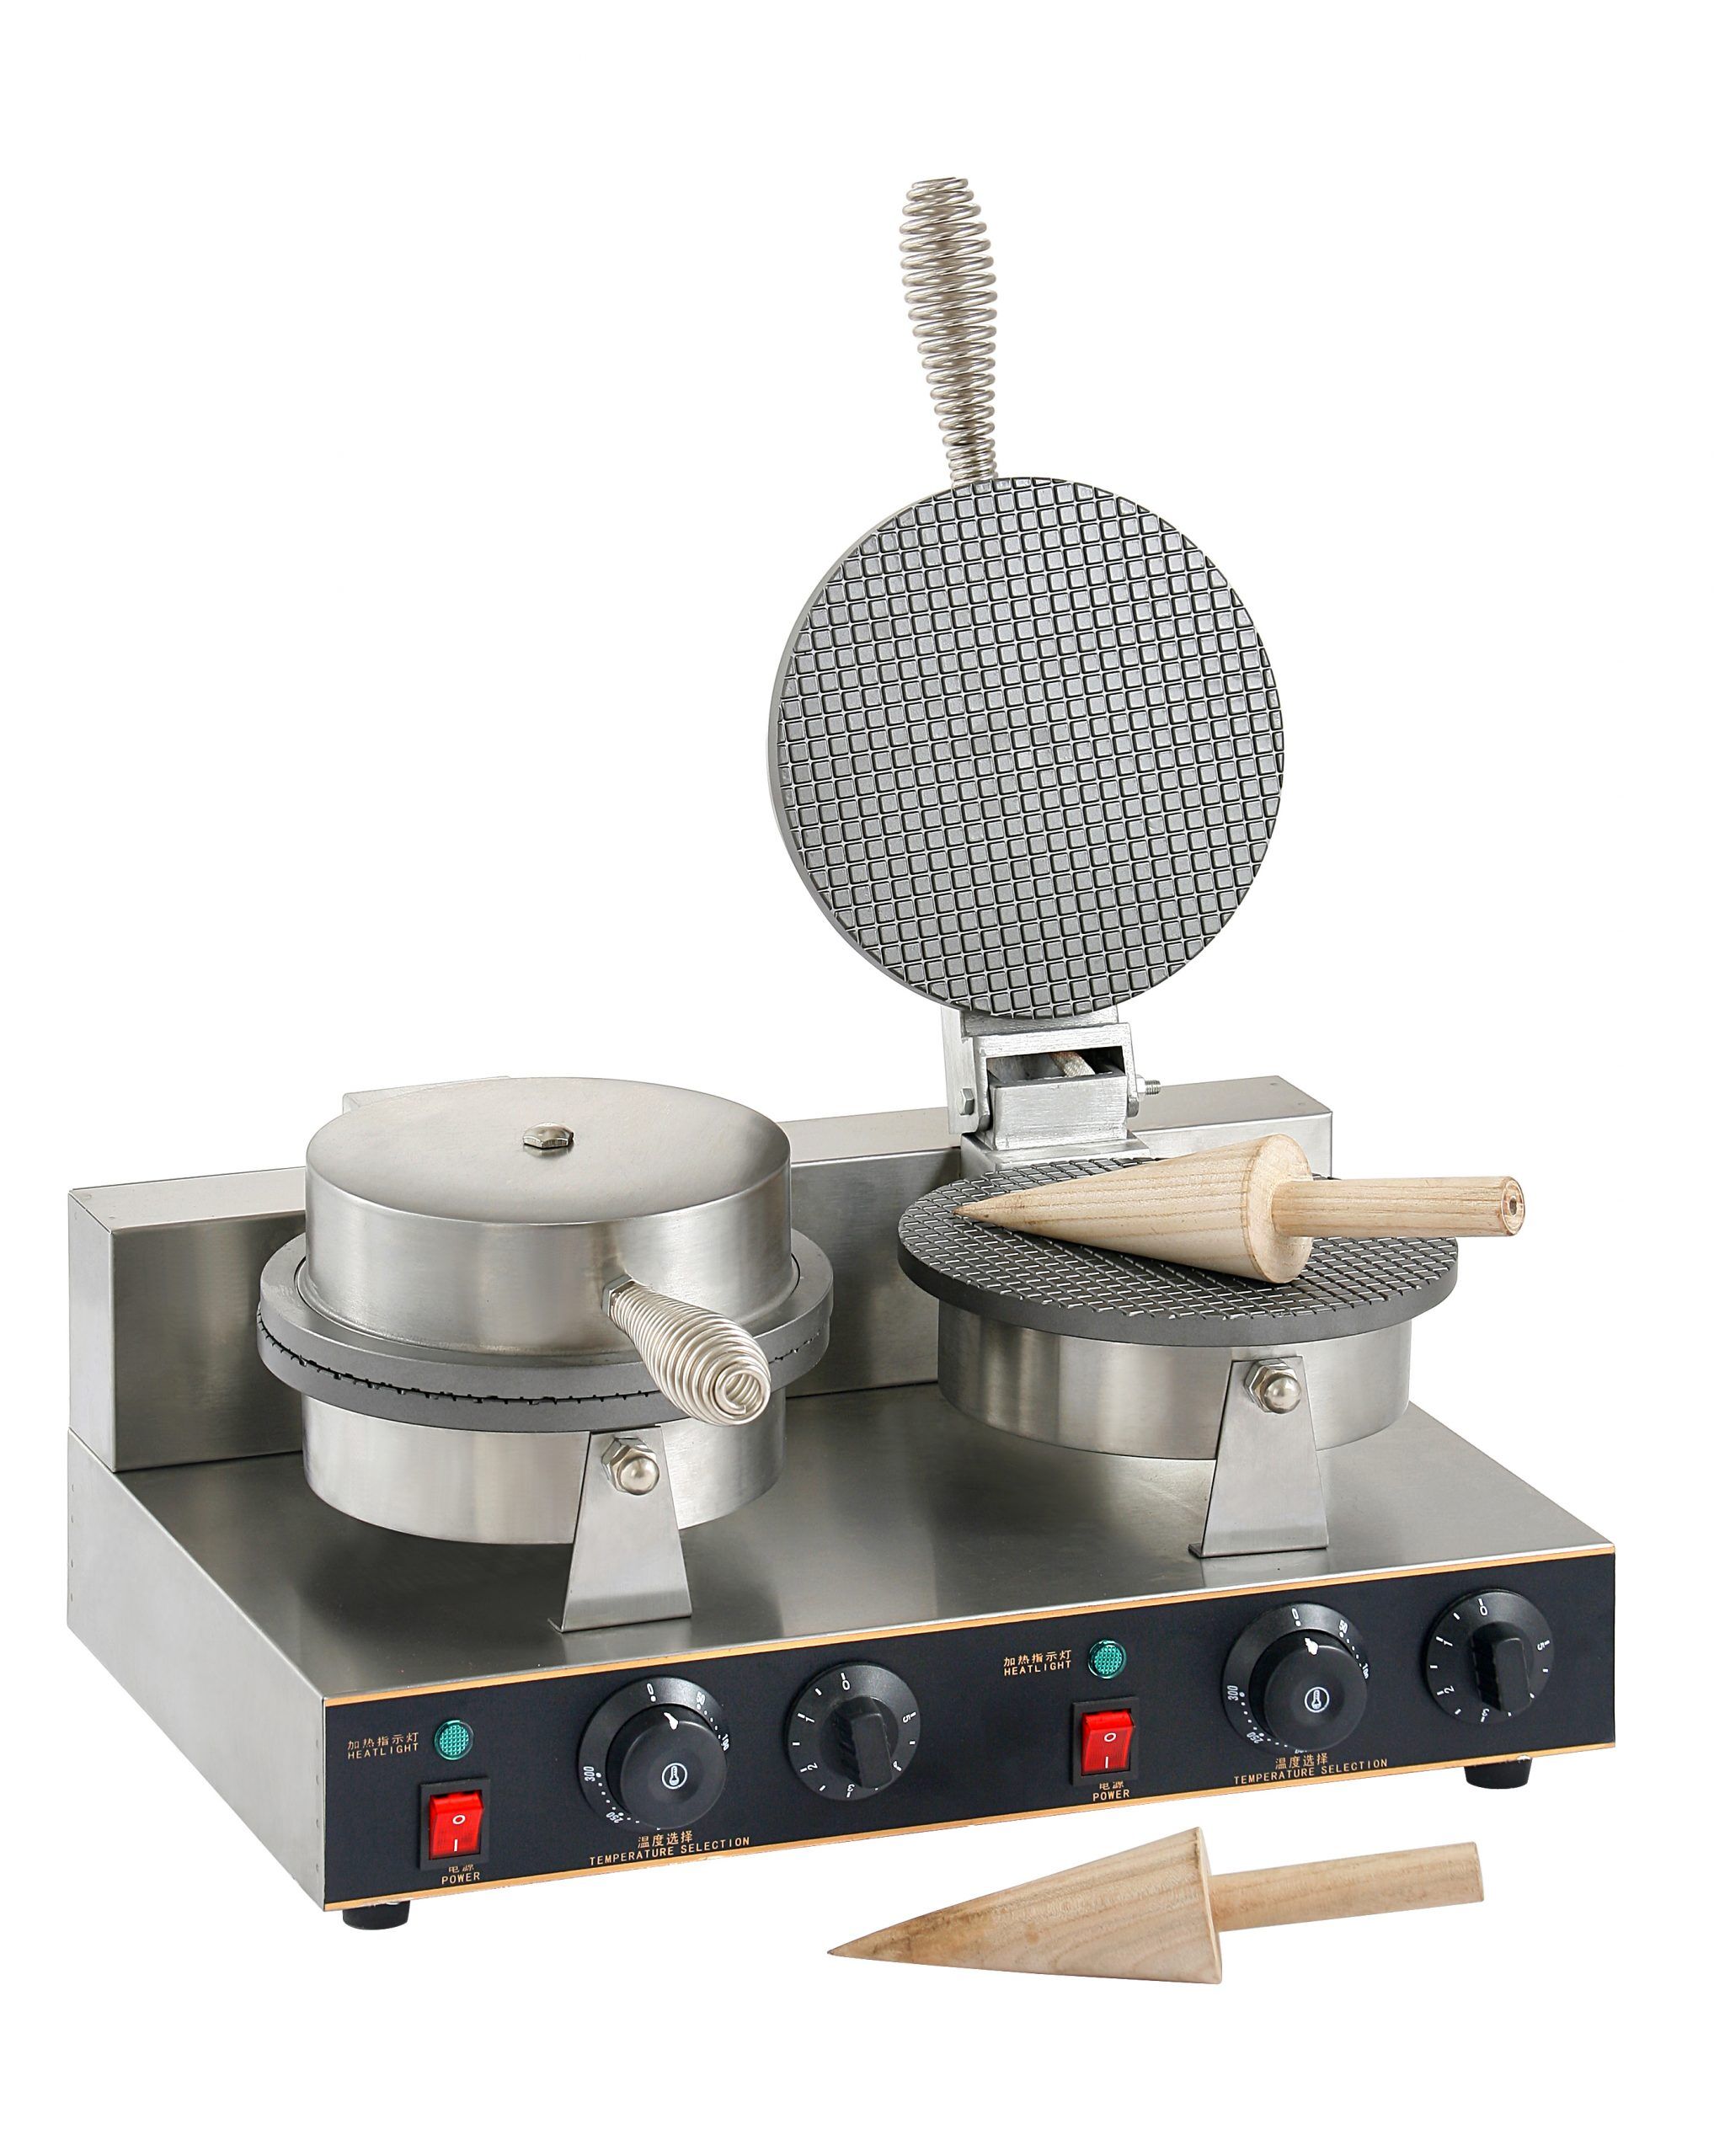 Table Top Cooking Products – Electric/ Gas/ Induction